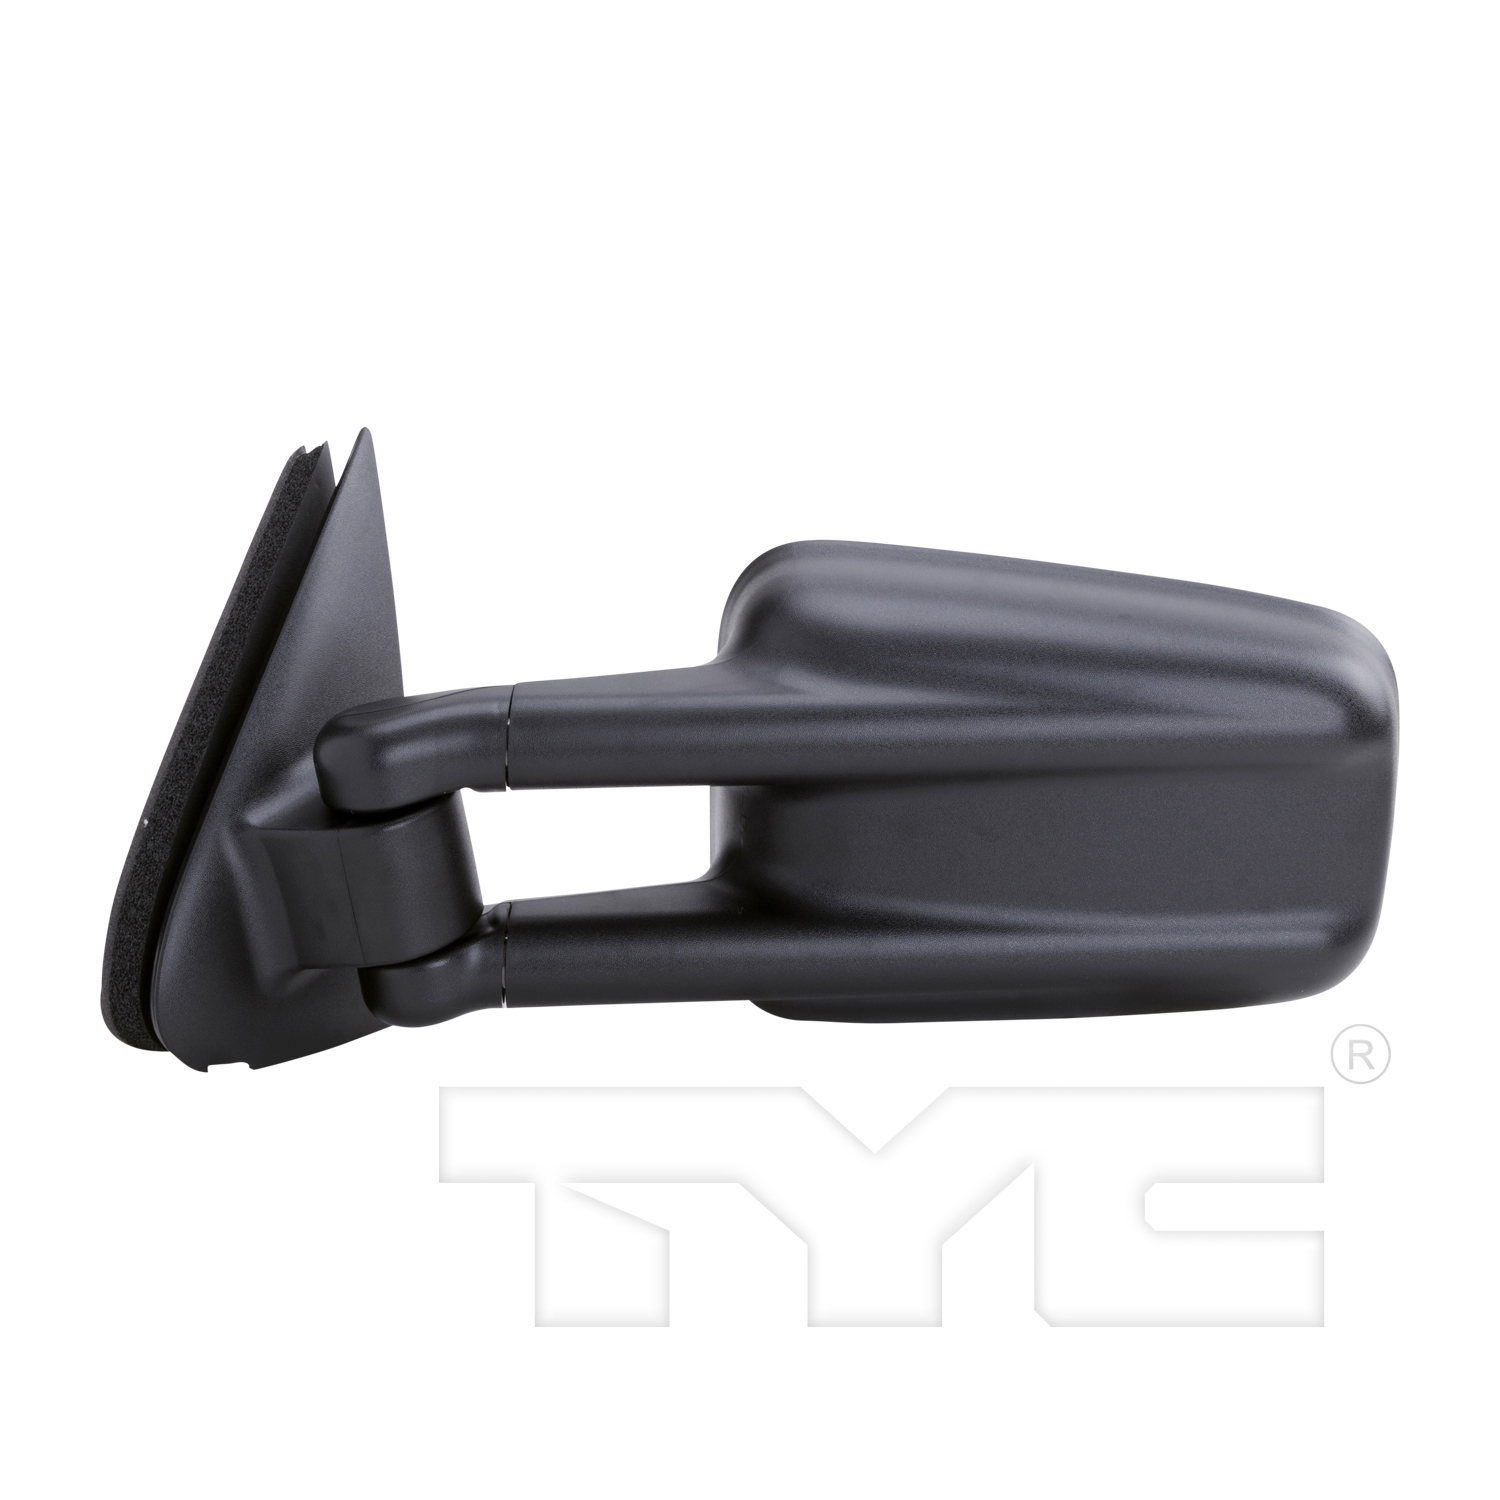 Aftermarket MIRRORS for CHEVROLET - SUBURBAN 1500, SUBURBAN 1500,00-06,LT Mirror outside rear view